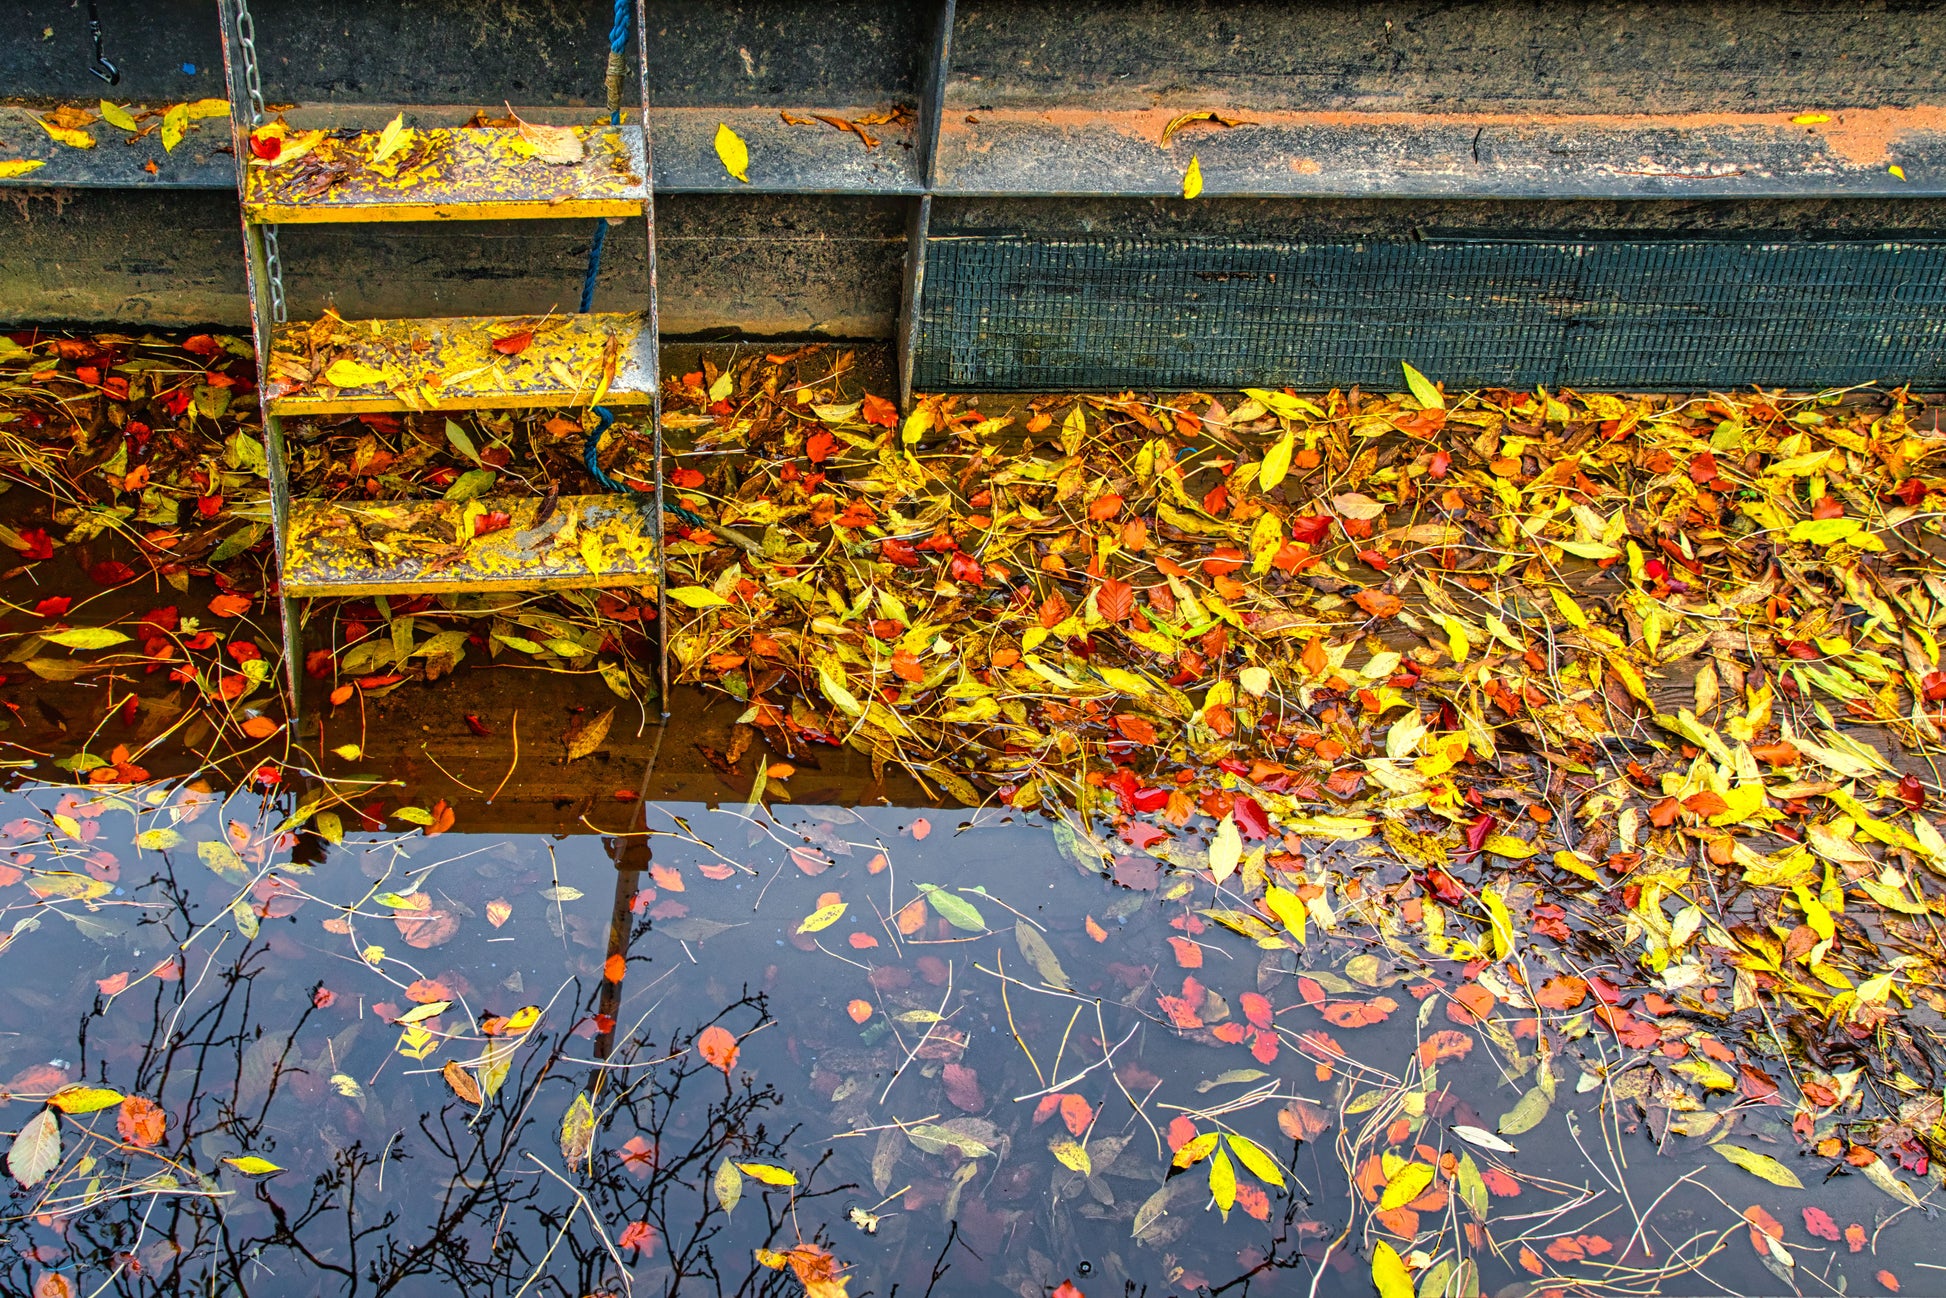 Fradley Junction Canal - Barge Filled with Leaves - DSC04965 - Photo - Photographer Martin Fisher